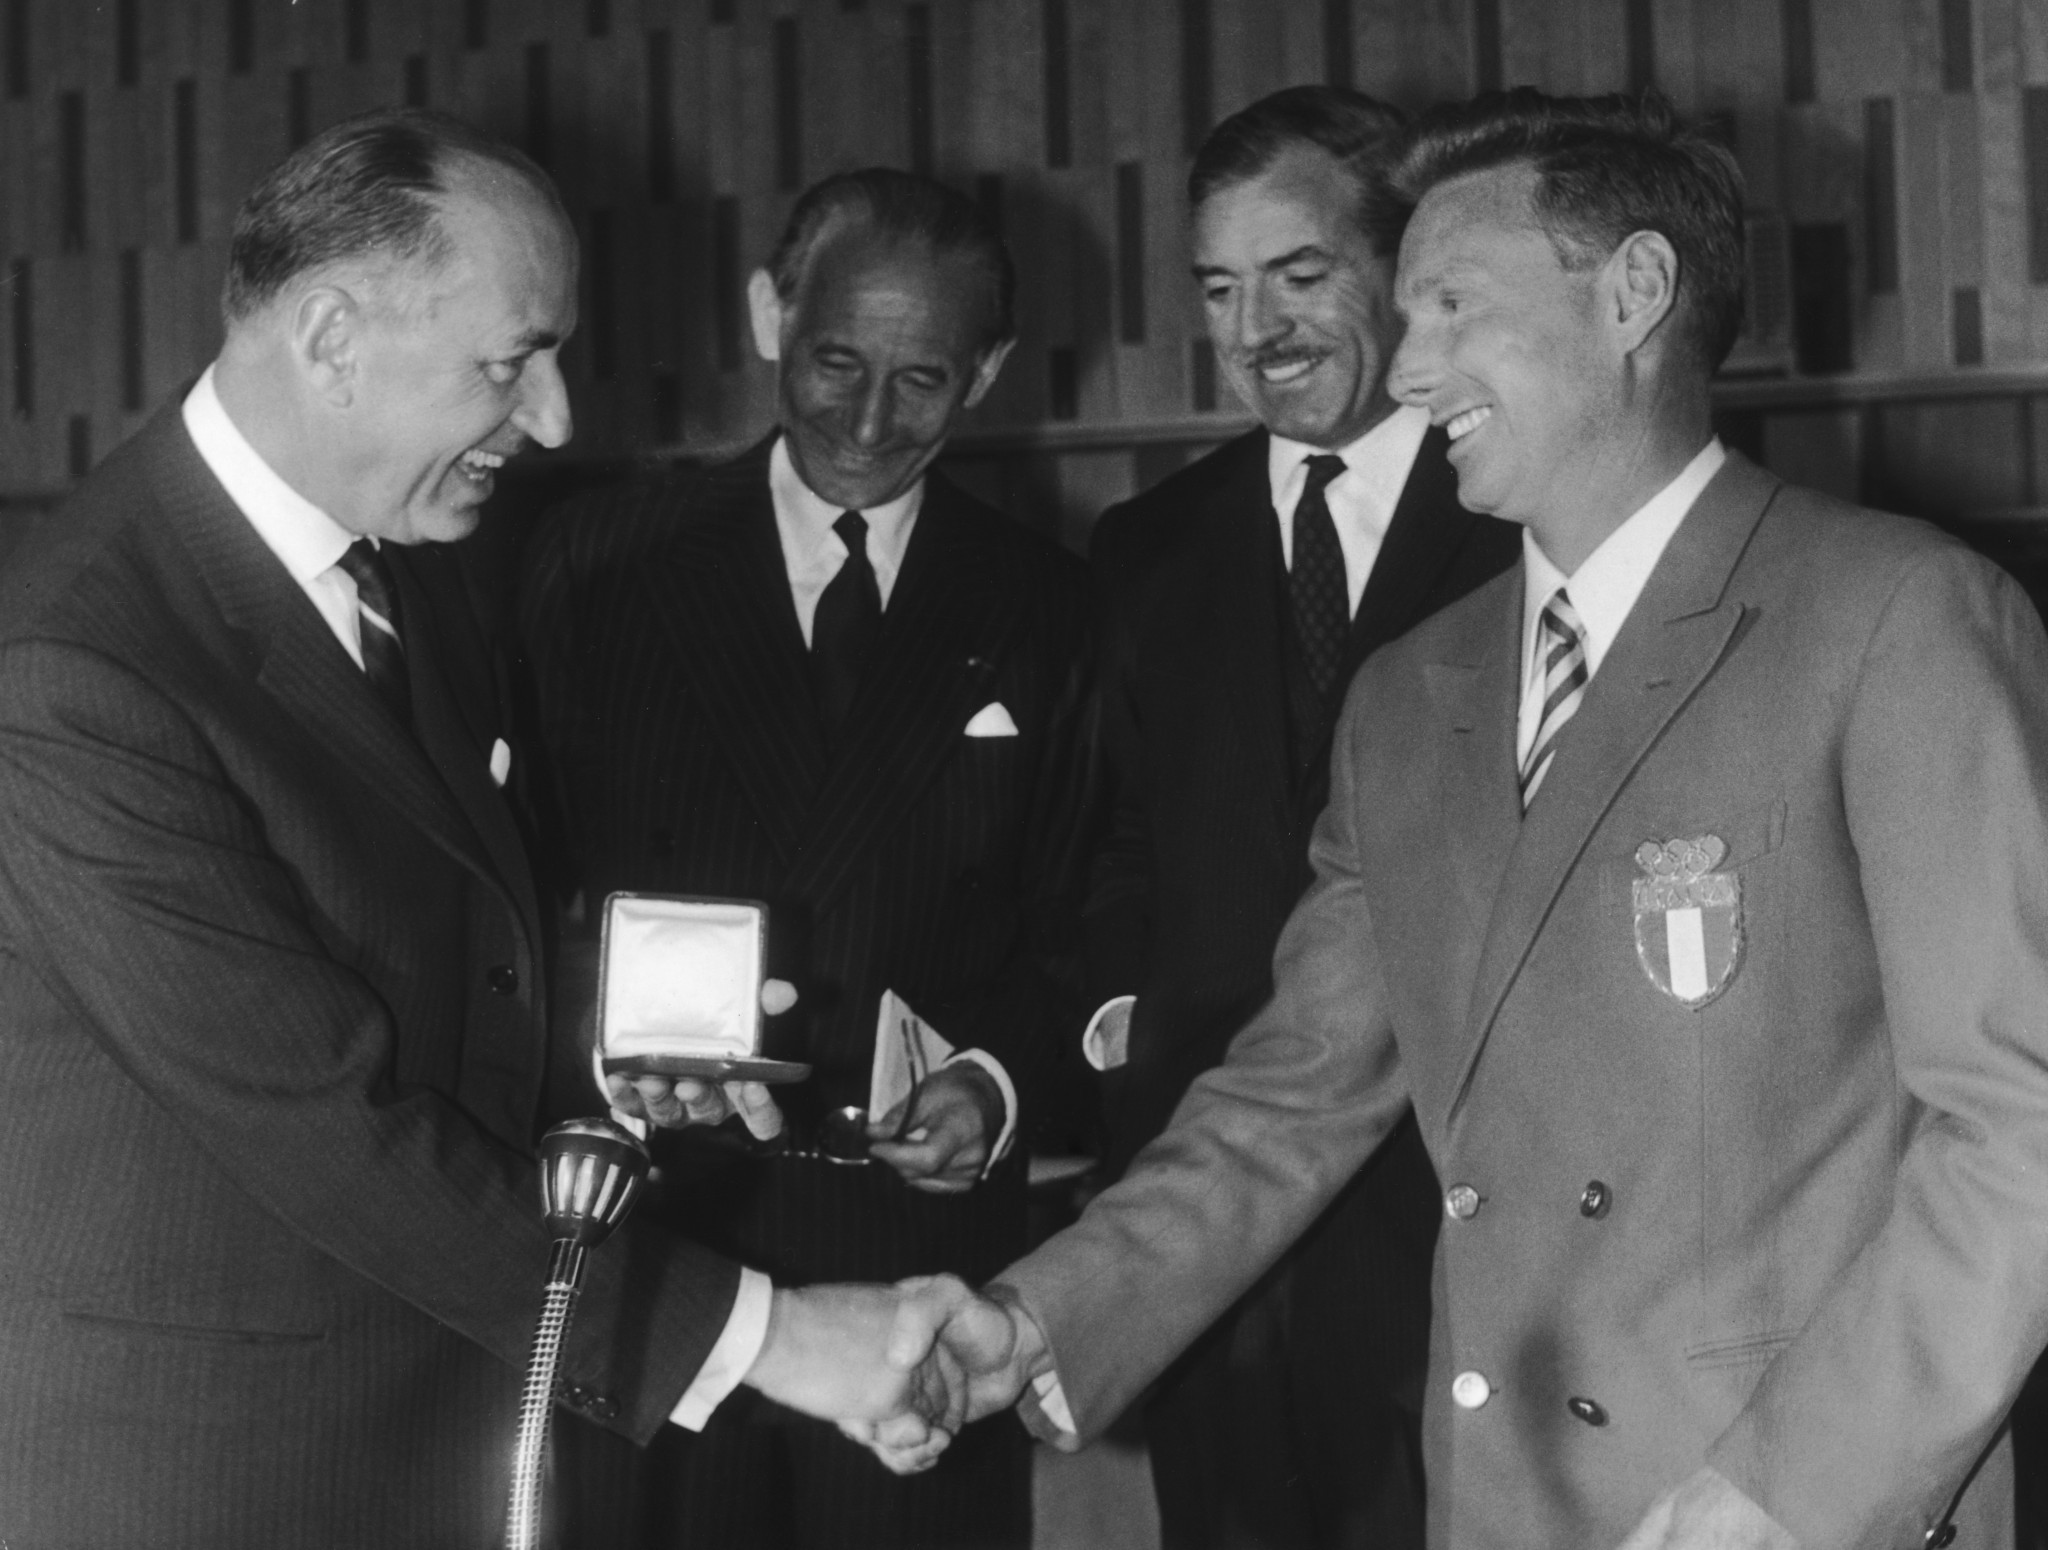 Eugenio Monti, right, was recognised for his sportsmanship at the 1964 Winter Olympics in Innsbruck ©Getty Images